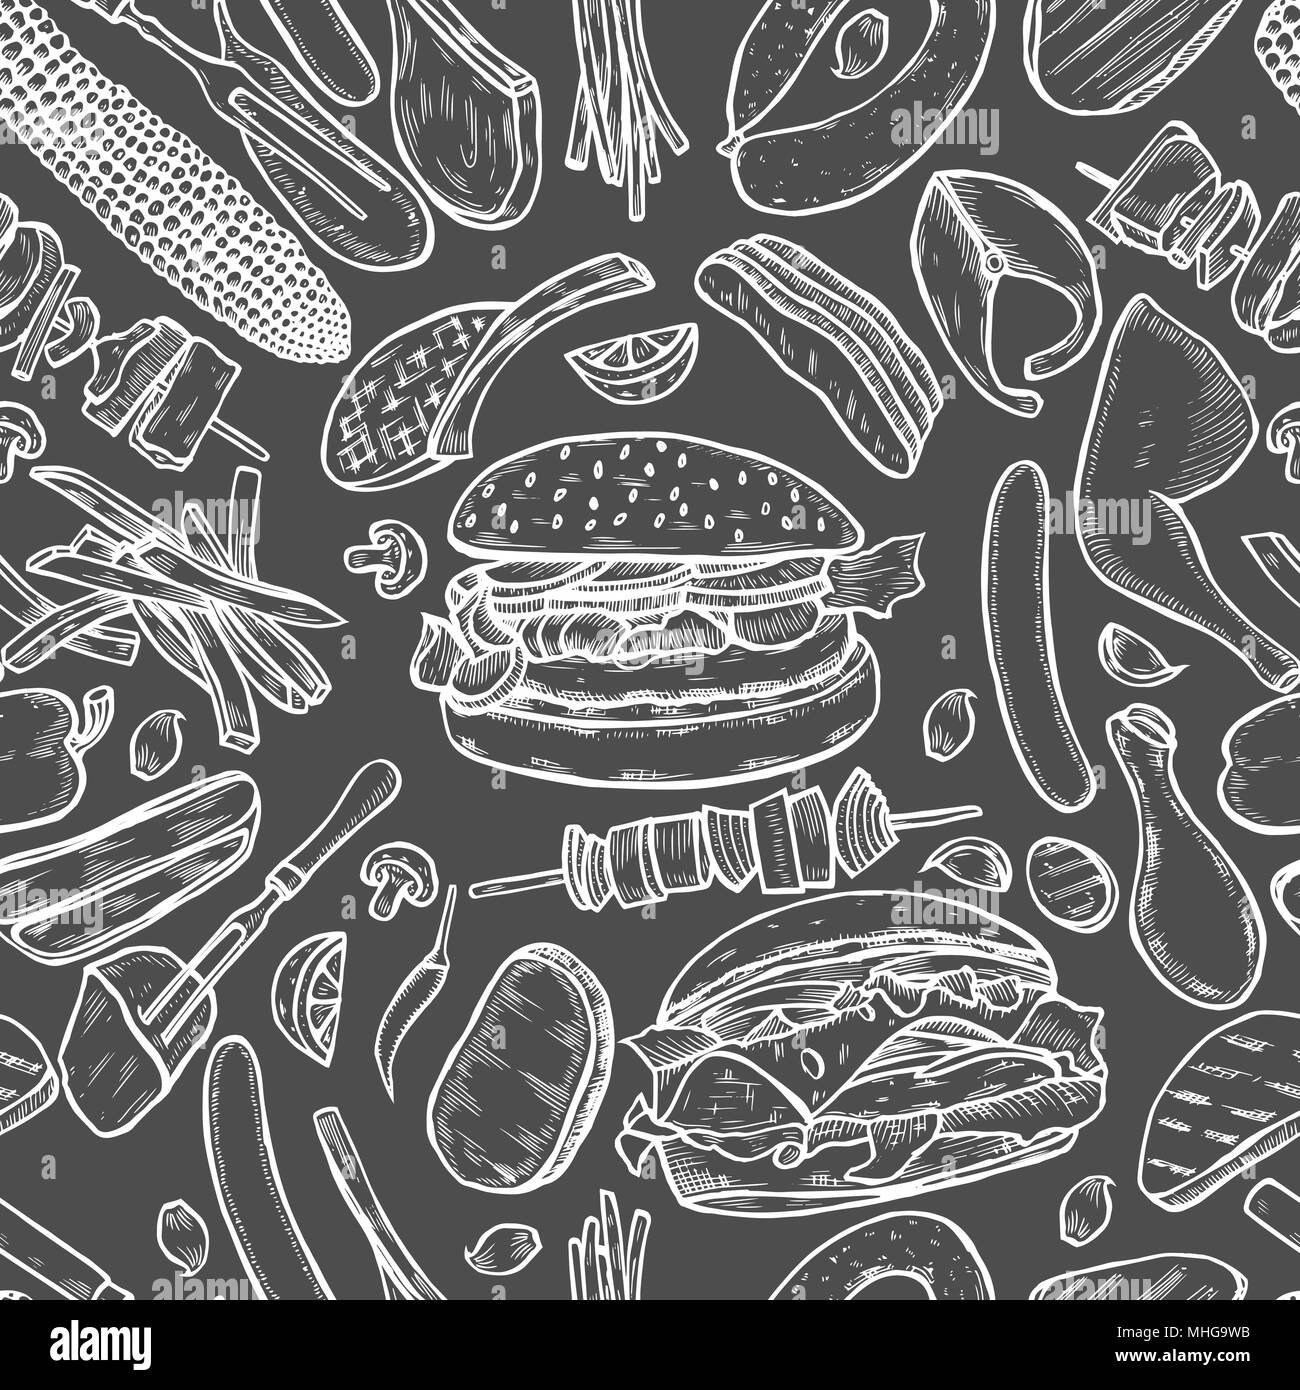 Vintage monochrome vector engraving Seamless pattern barbecue grill. Top view with charcoal, mushroom, tomato, pepper, sausage, lemon, kebab, fish and Stock Vector